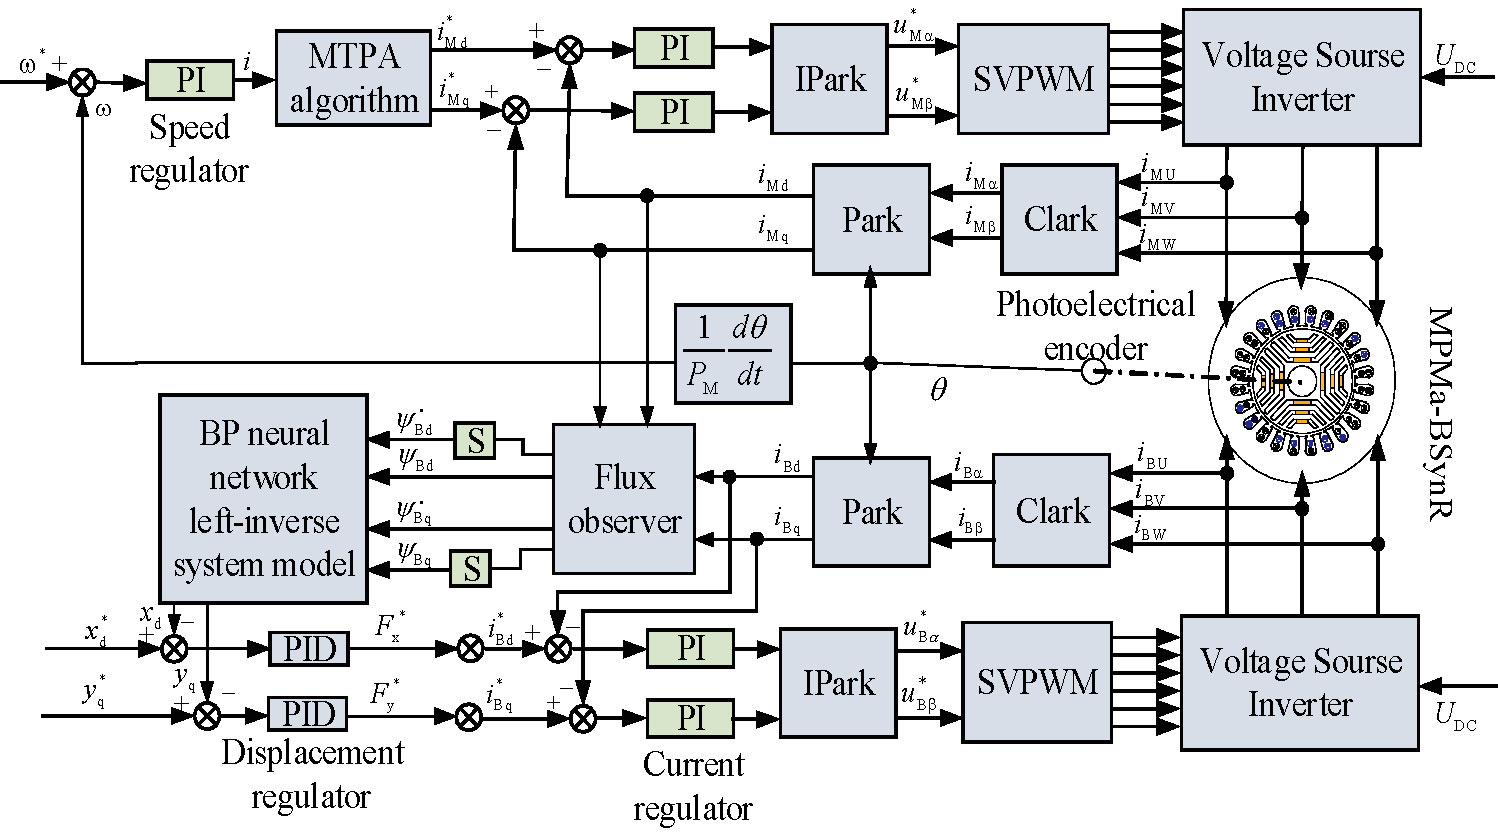 Displacement Self-sensing Control of Permanent Magnet Assisted Bearingless Synchronous Reluctance Motor Based on BP Neural Network Optimized by Improved PSO